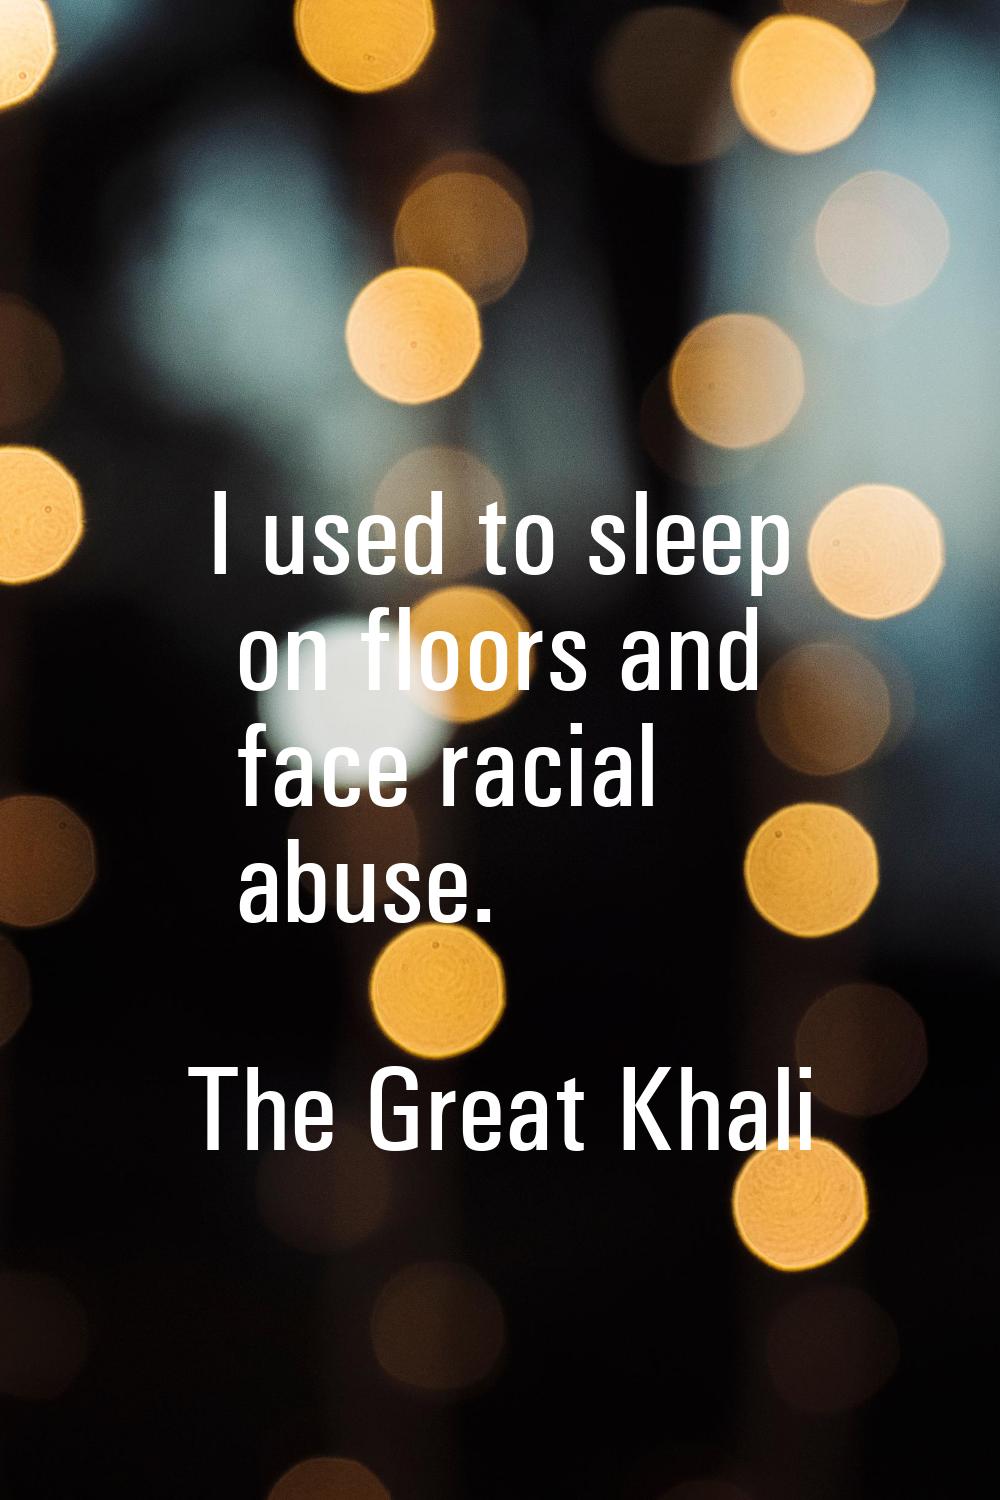 I used to sleep on floors and face racial abuse.